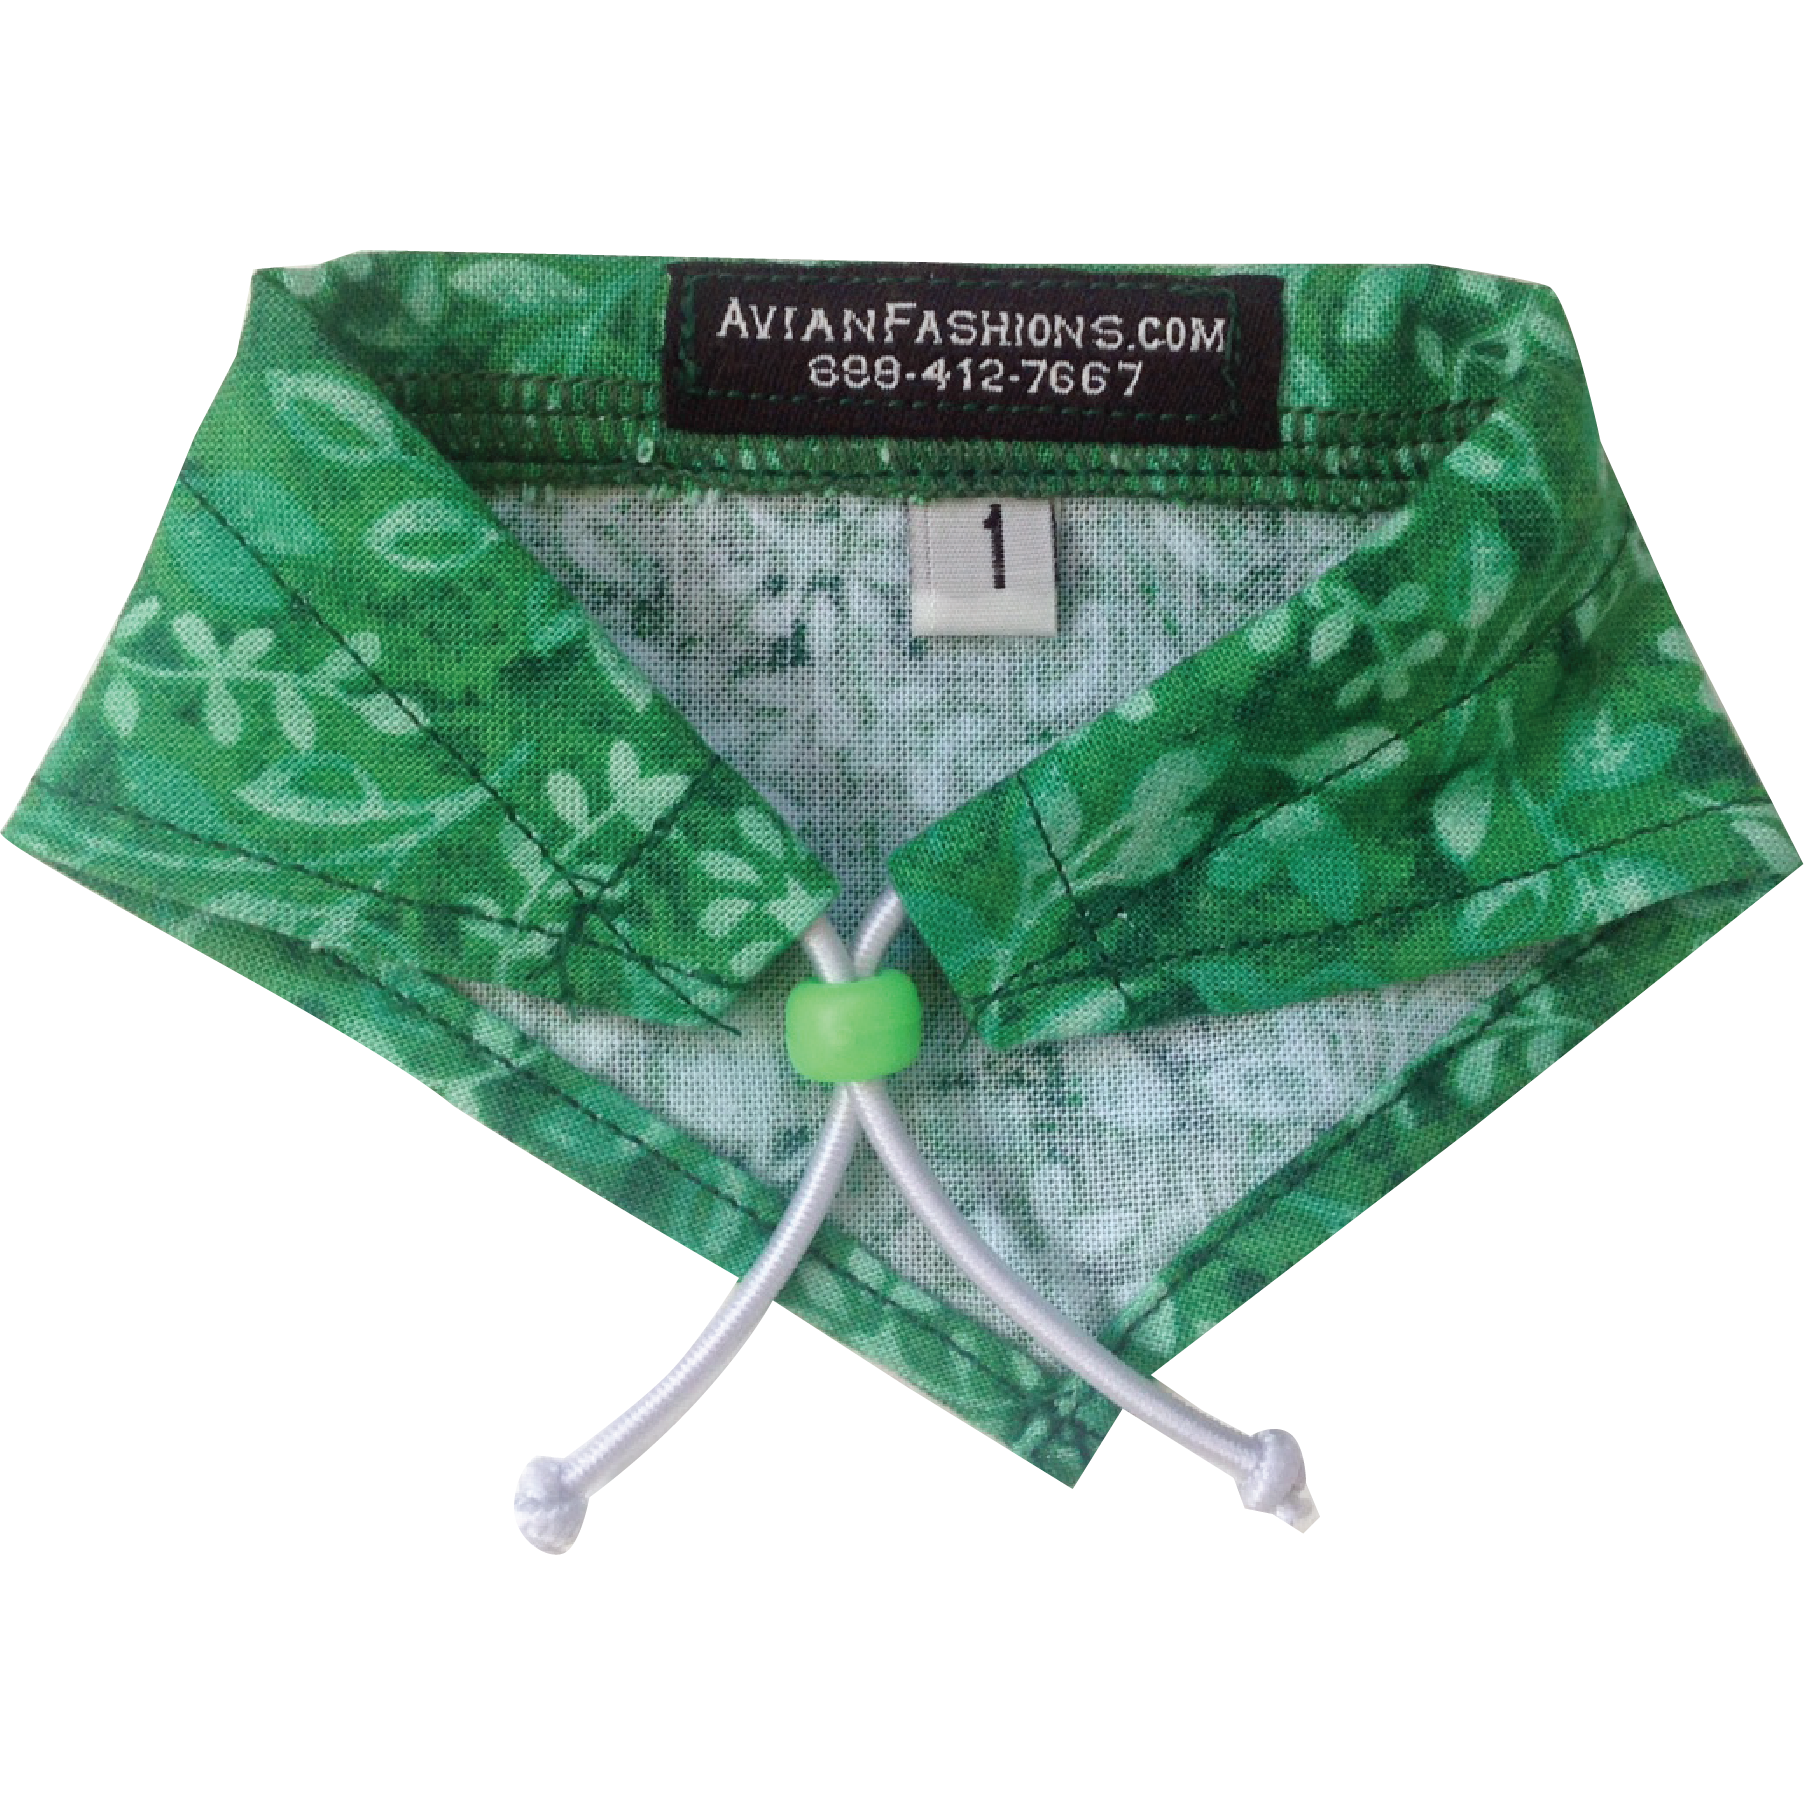 the Shop Fashions Online - for Green Bandana 7.98 at Avian Floral usd Only